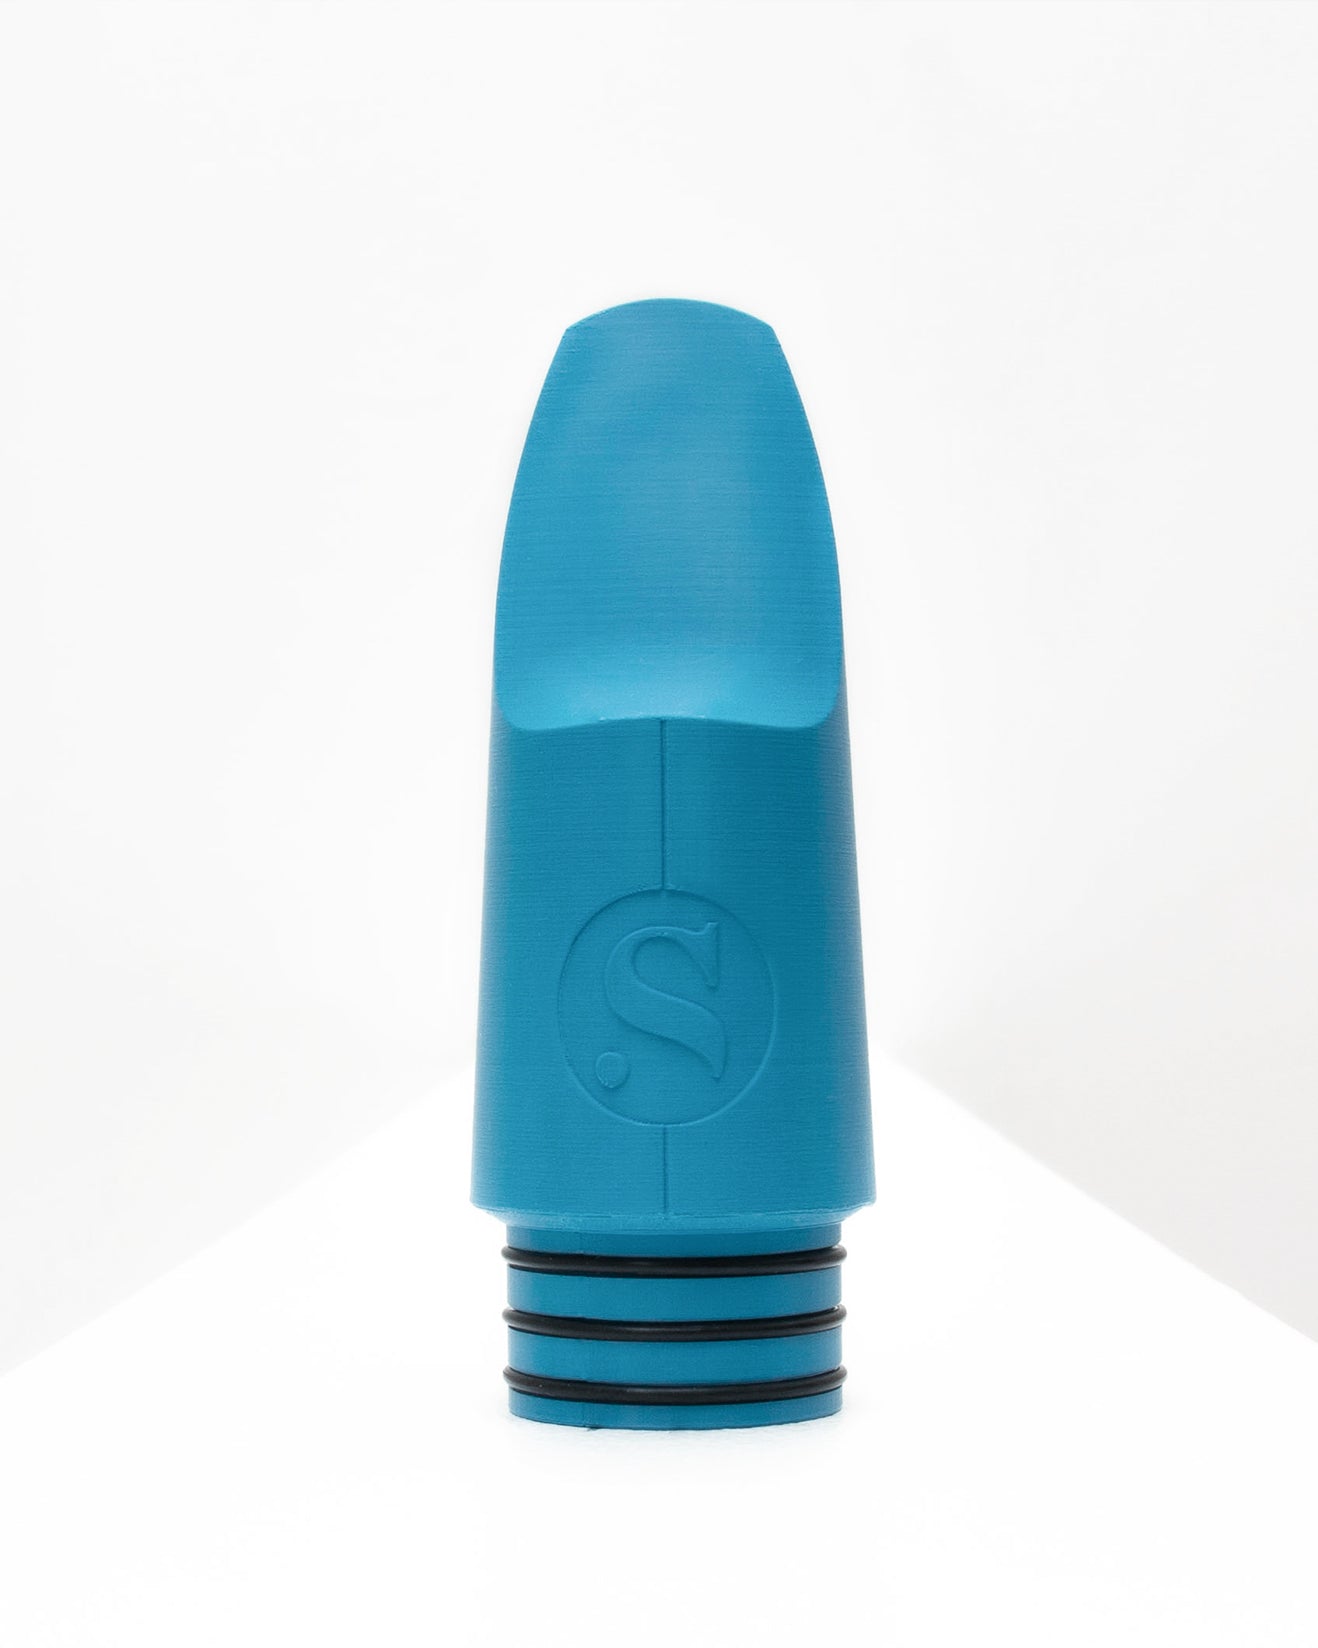 Bass Signature Clarinet mouthpiece - Daro Behroozi by Syos - Sea Blue